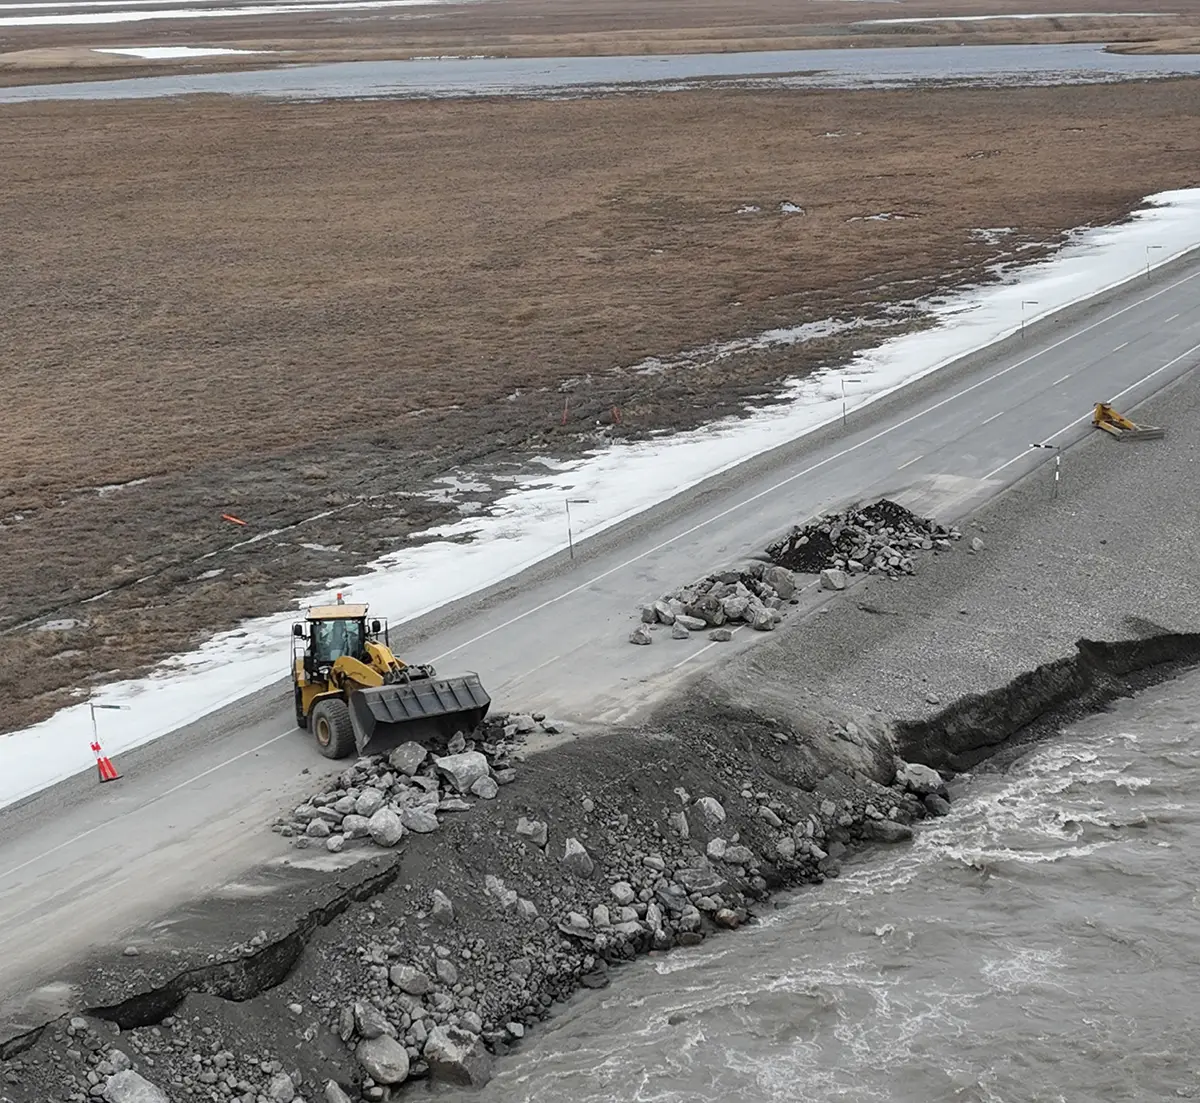 General contractor Cruz Construction hauled rock from its quarry 105 miles away from the erosion site and could barely keep up with the Sagavanirktok River eroding the Dalton Highway. The company partnered with Alyeska Pipeline Service Company to use rock from Alyeska’s quarry, which was closer.